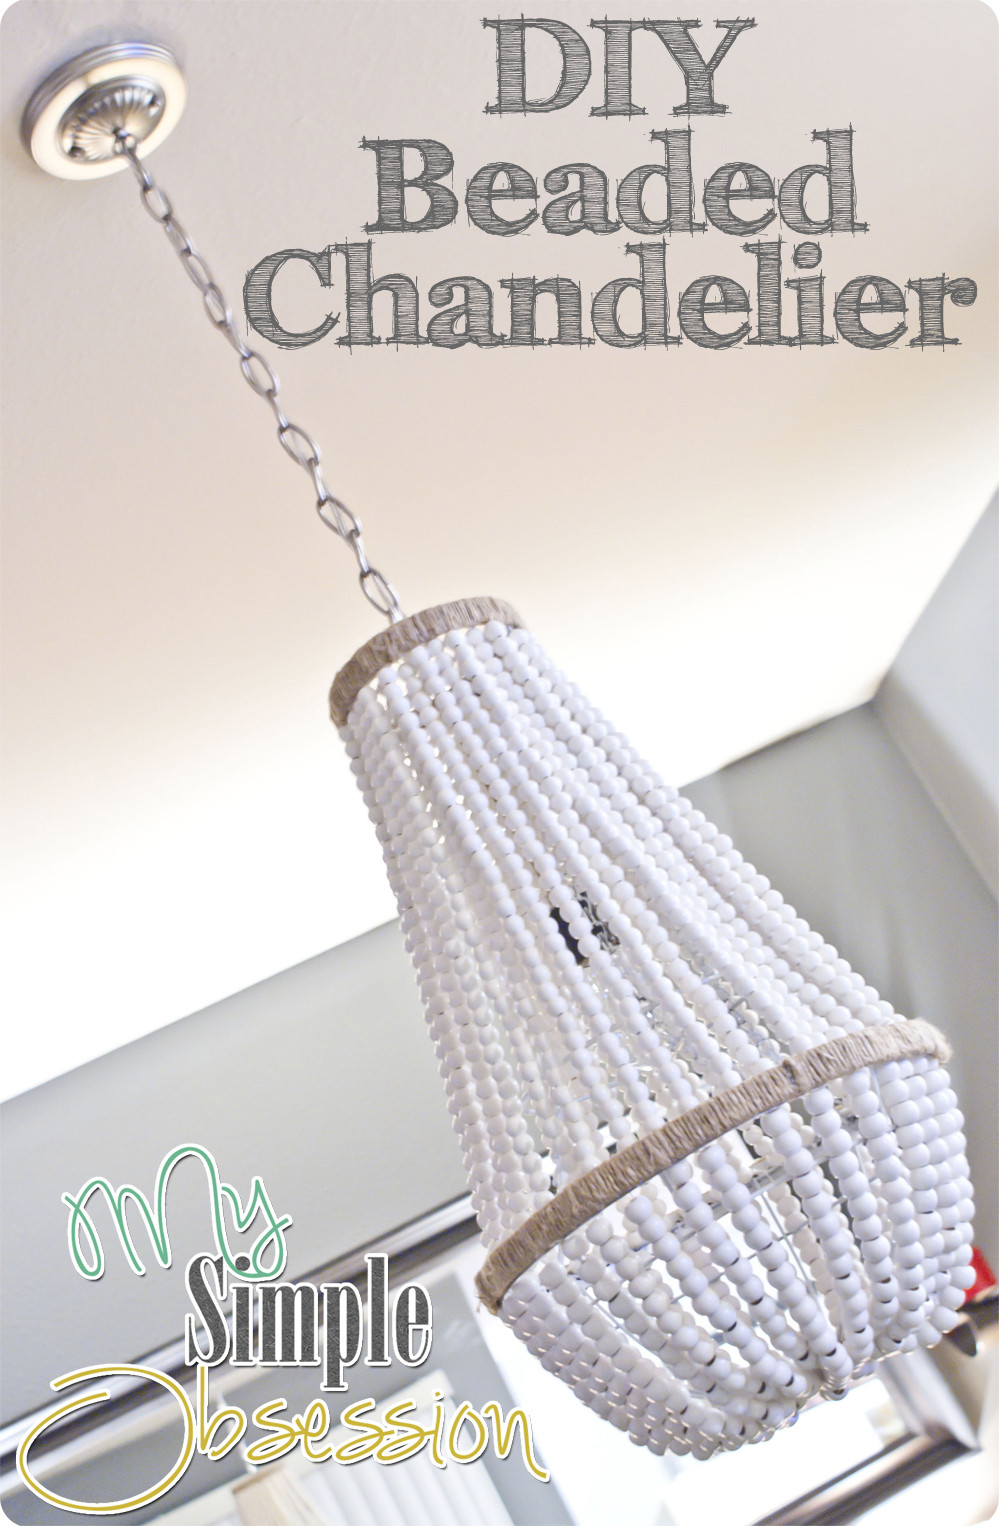 DIY Wood Bead Chandelier
 Upcycle a Plain Chandelier into a Beaded Showpiece